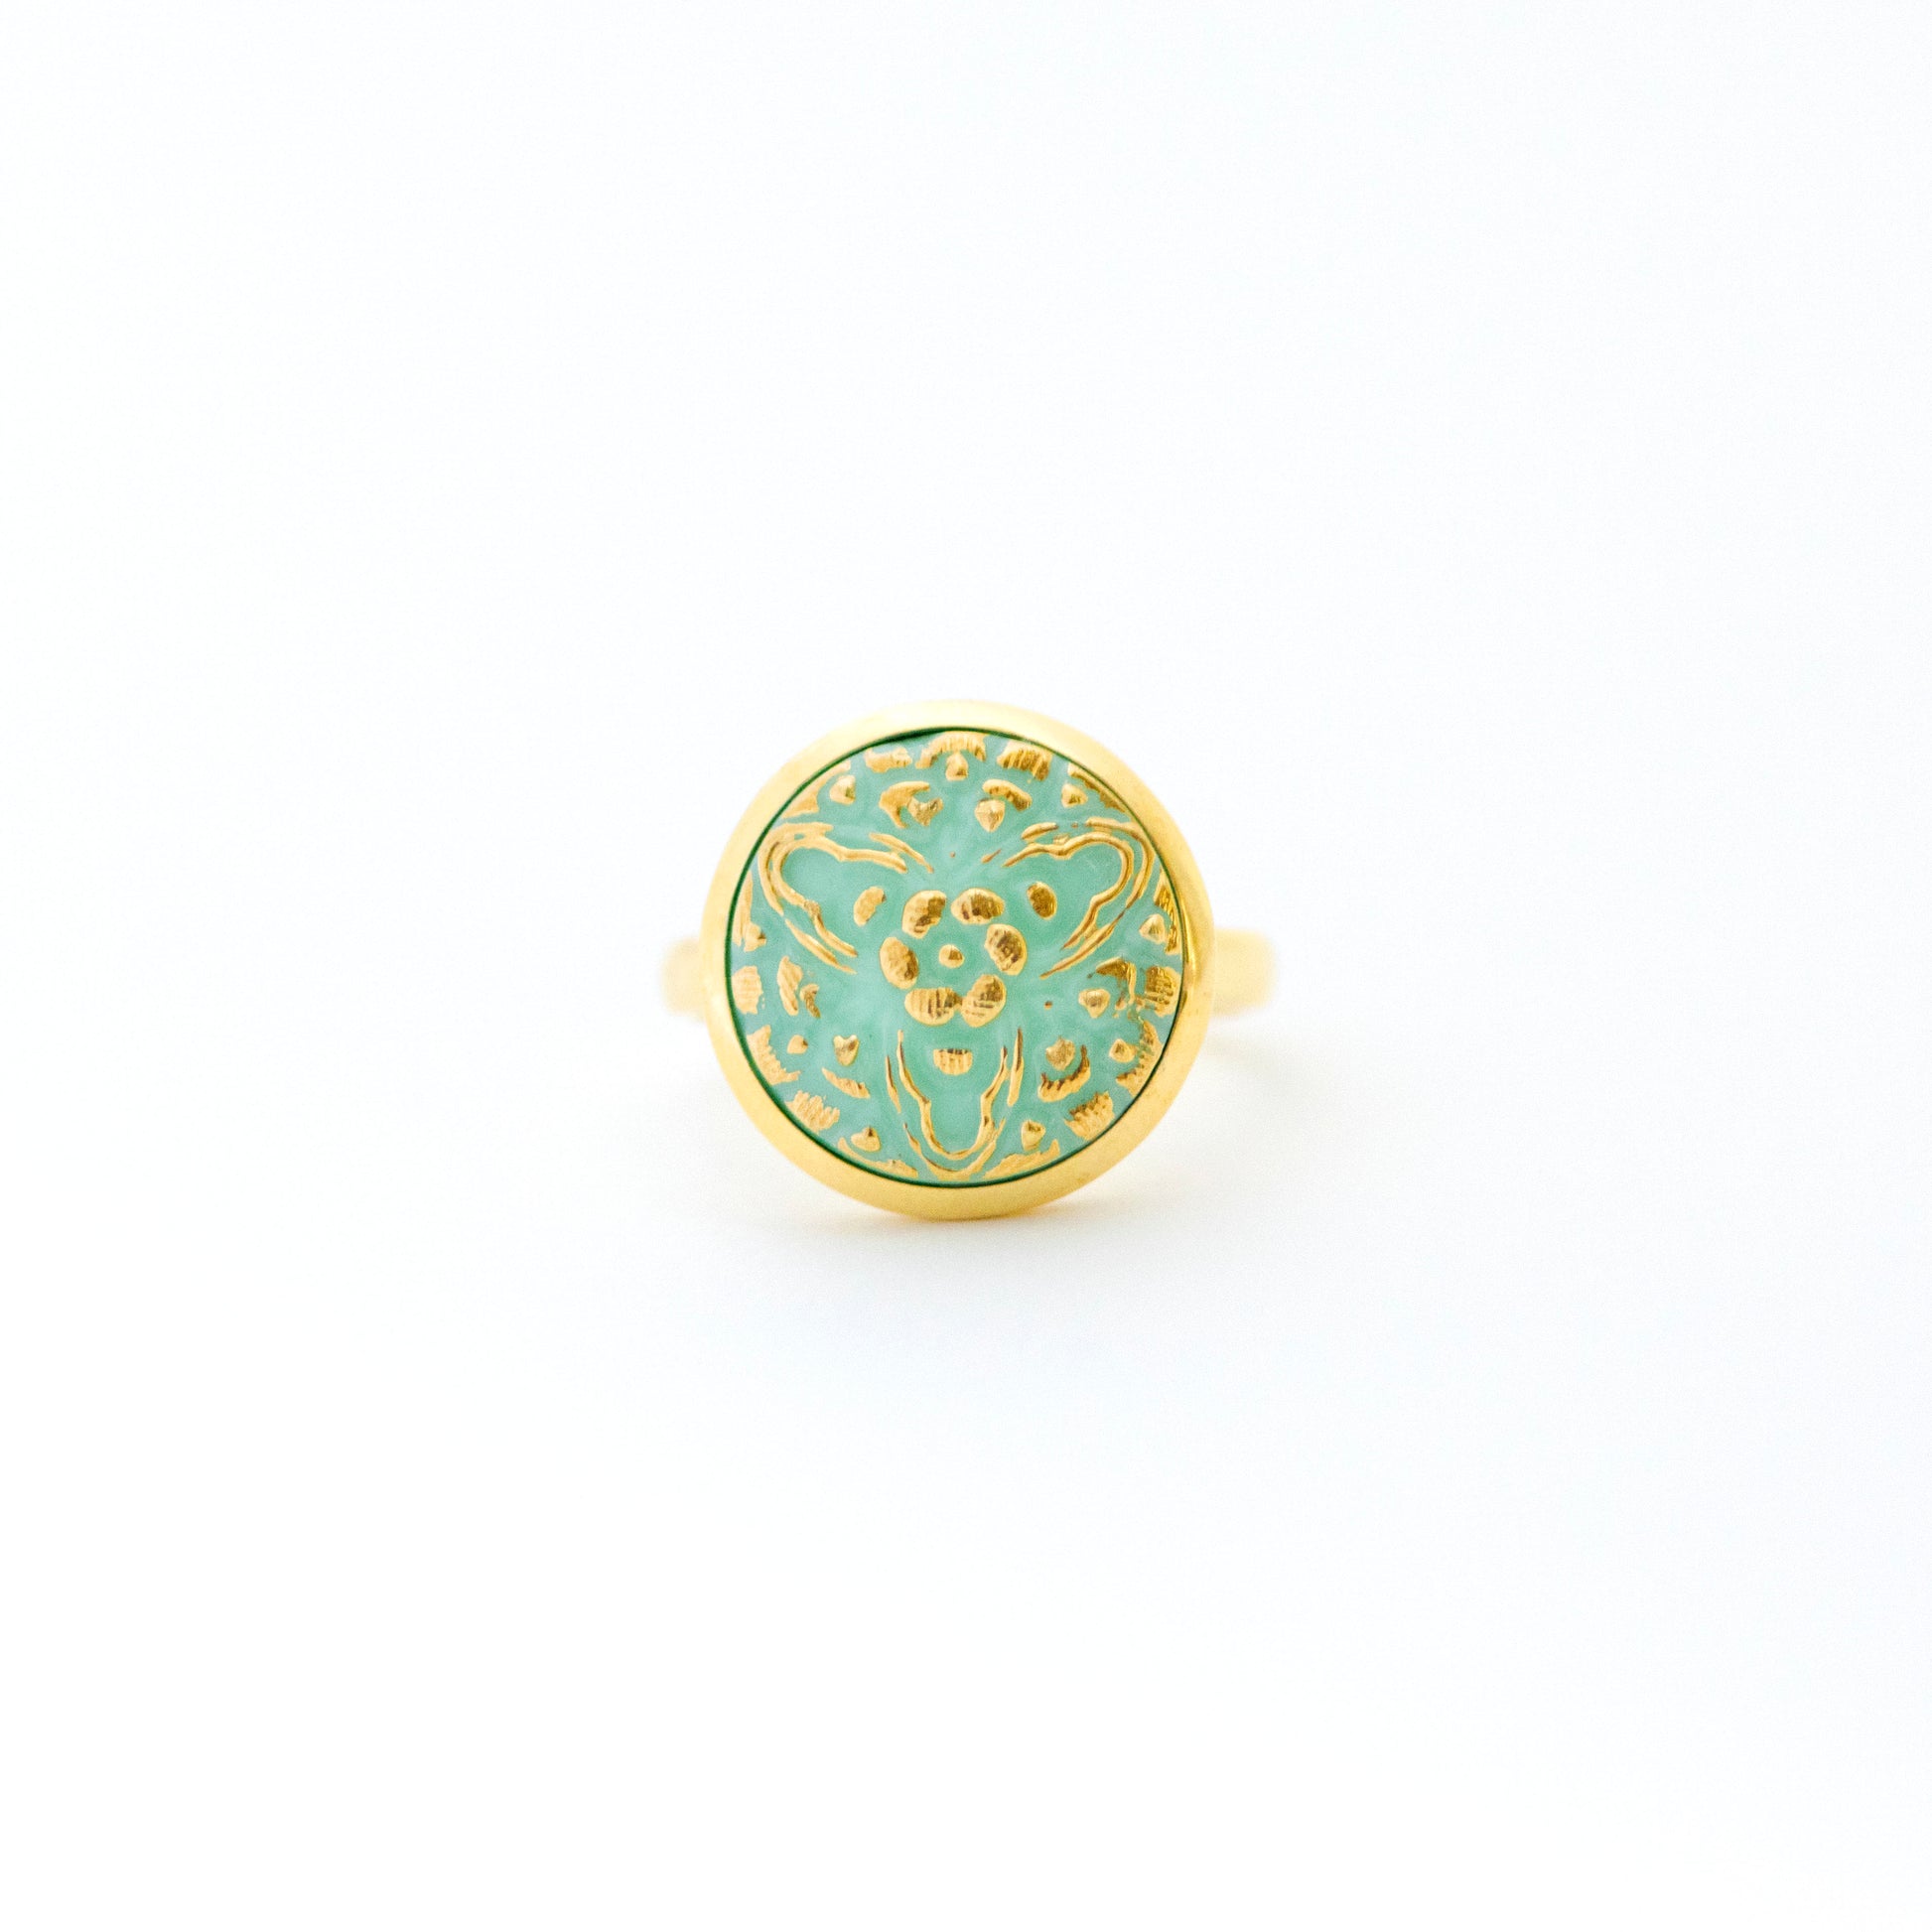 Light turquoise uranium glass Czech glass button with 3 point floral design.  Uranium glass button contains 2% uranium dioxide. This small amount in the glass allows it to fluoresce (glow) green under a black light and is also safe to wear.  Set in gold over sterling silver.